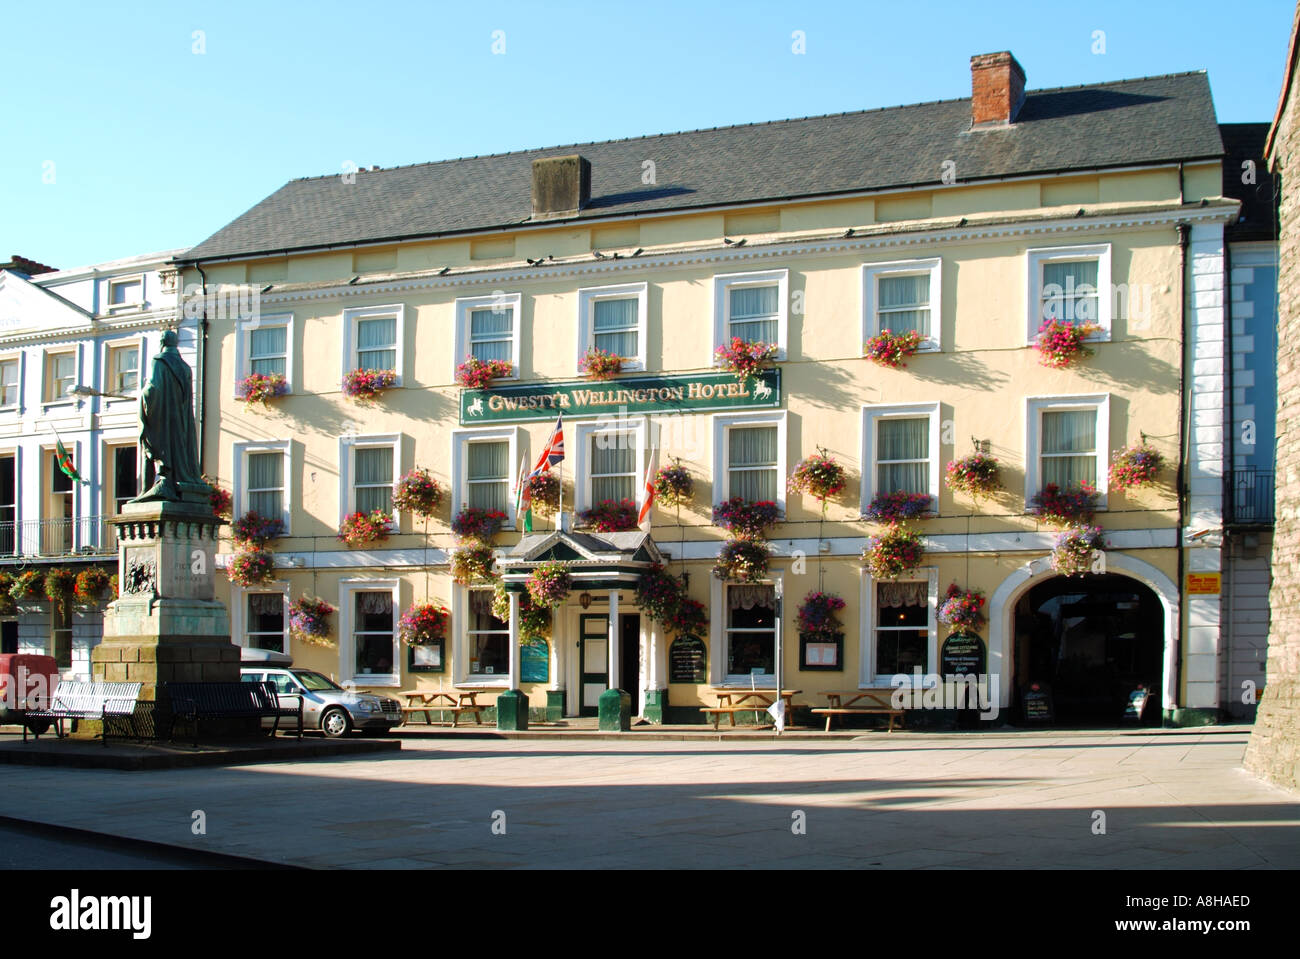 Brecon town centre Wellington hotel frontage colourful display of summer flowers & statue of Arthur Wellesley 1st Duke of Wellington Powys Wales UK Stock Photo